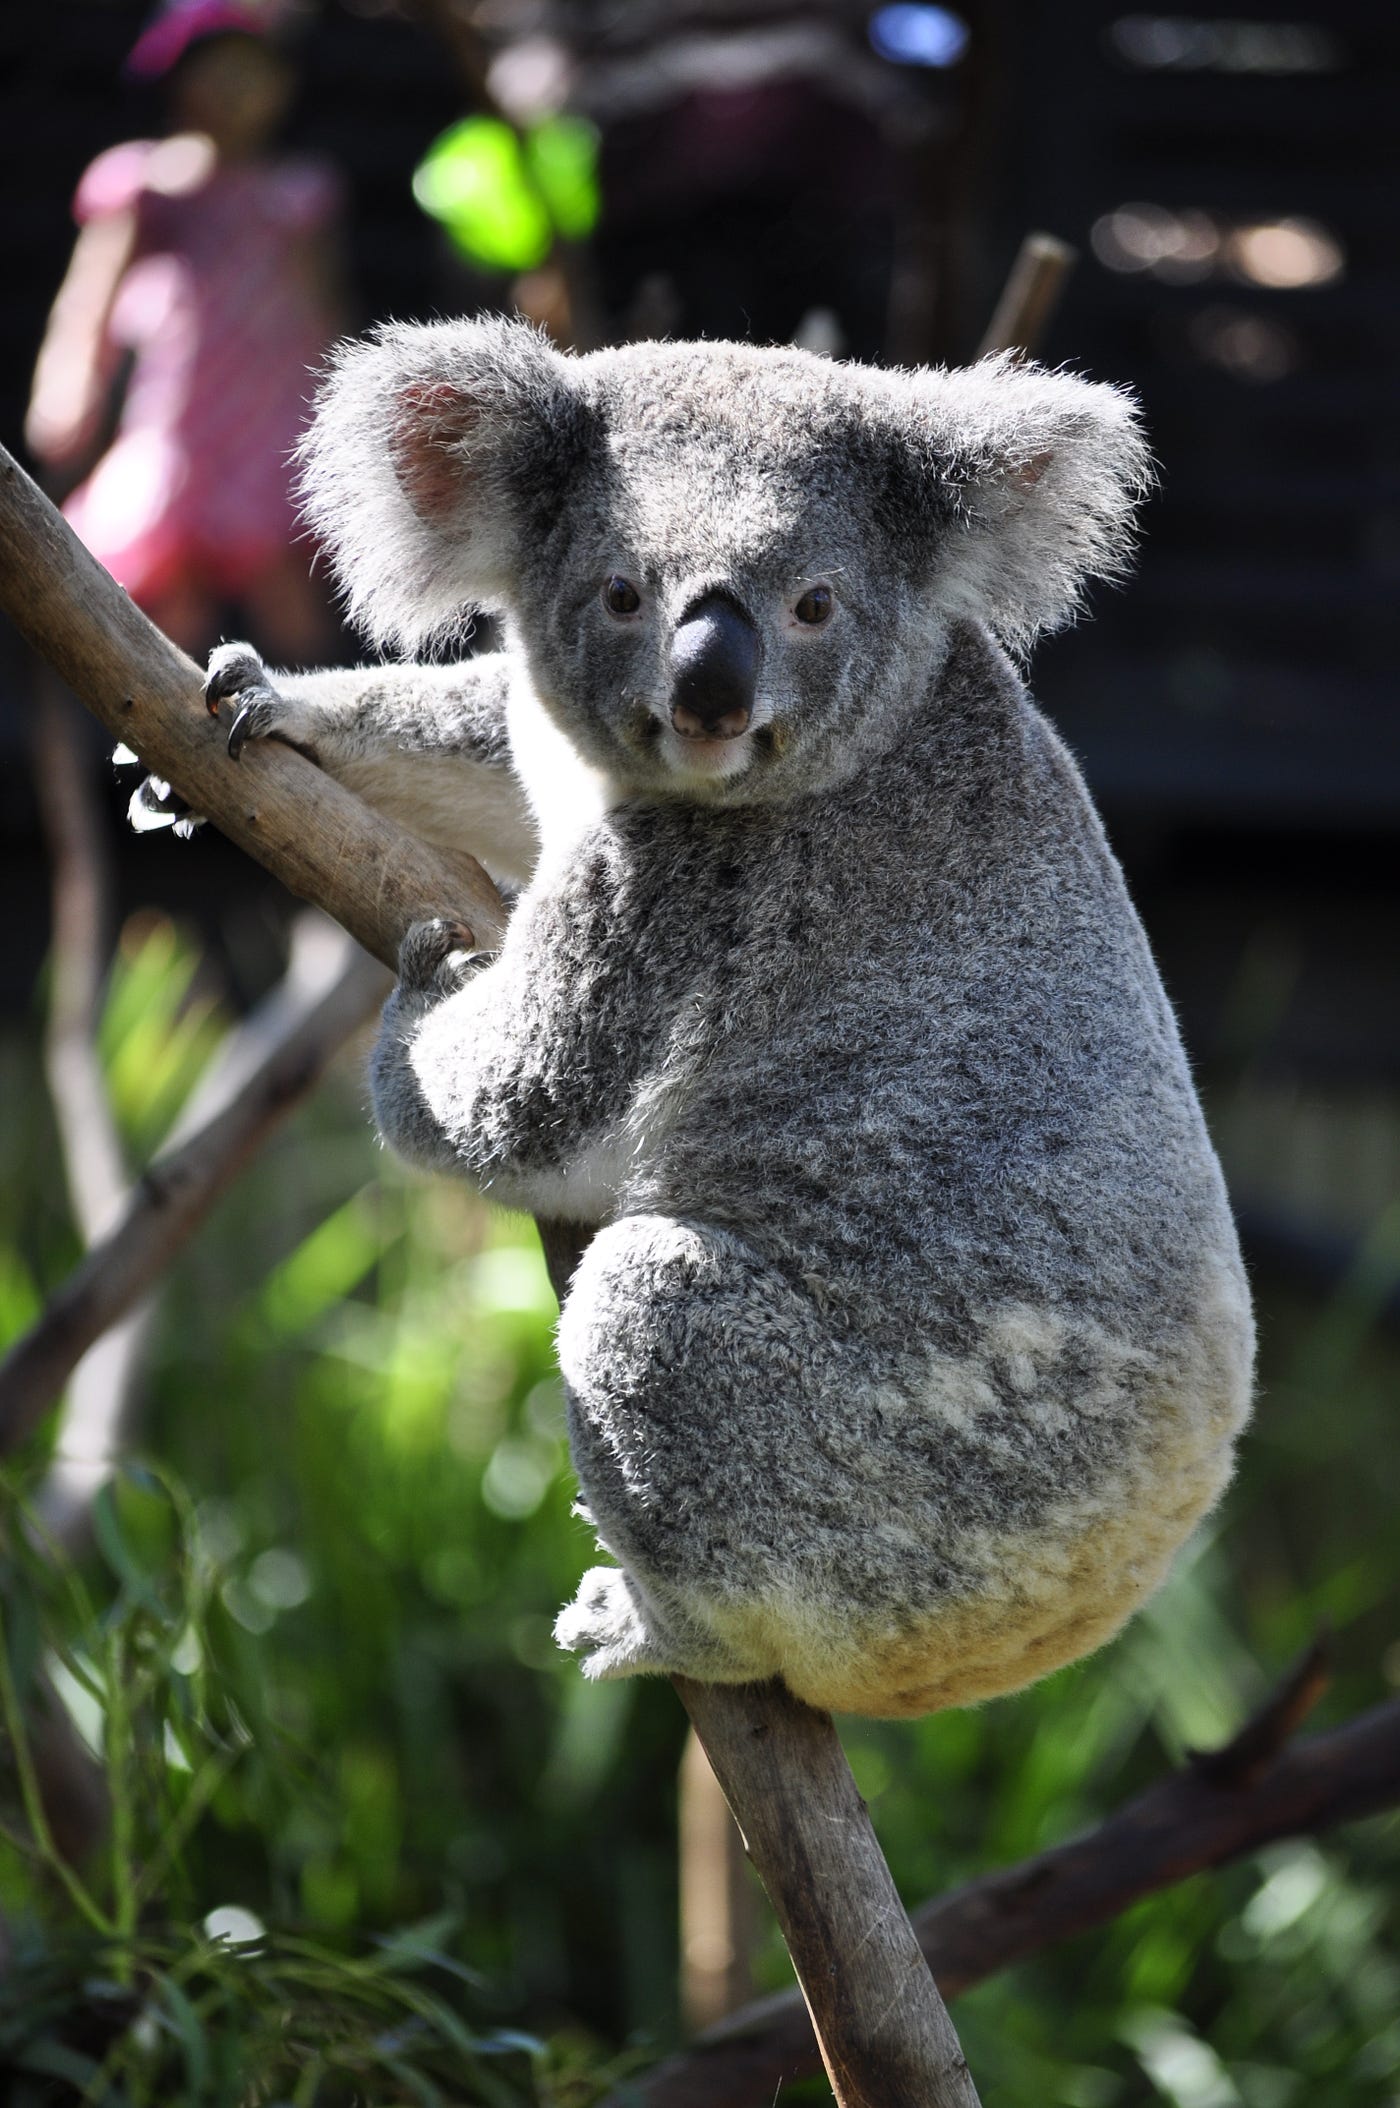 Koala mating habits, diet and habitat myths and misconceptions